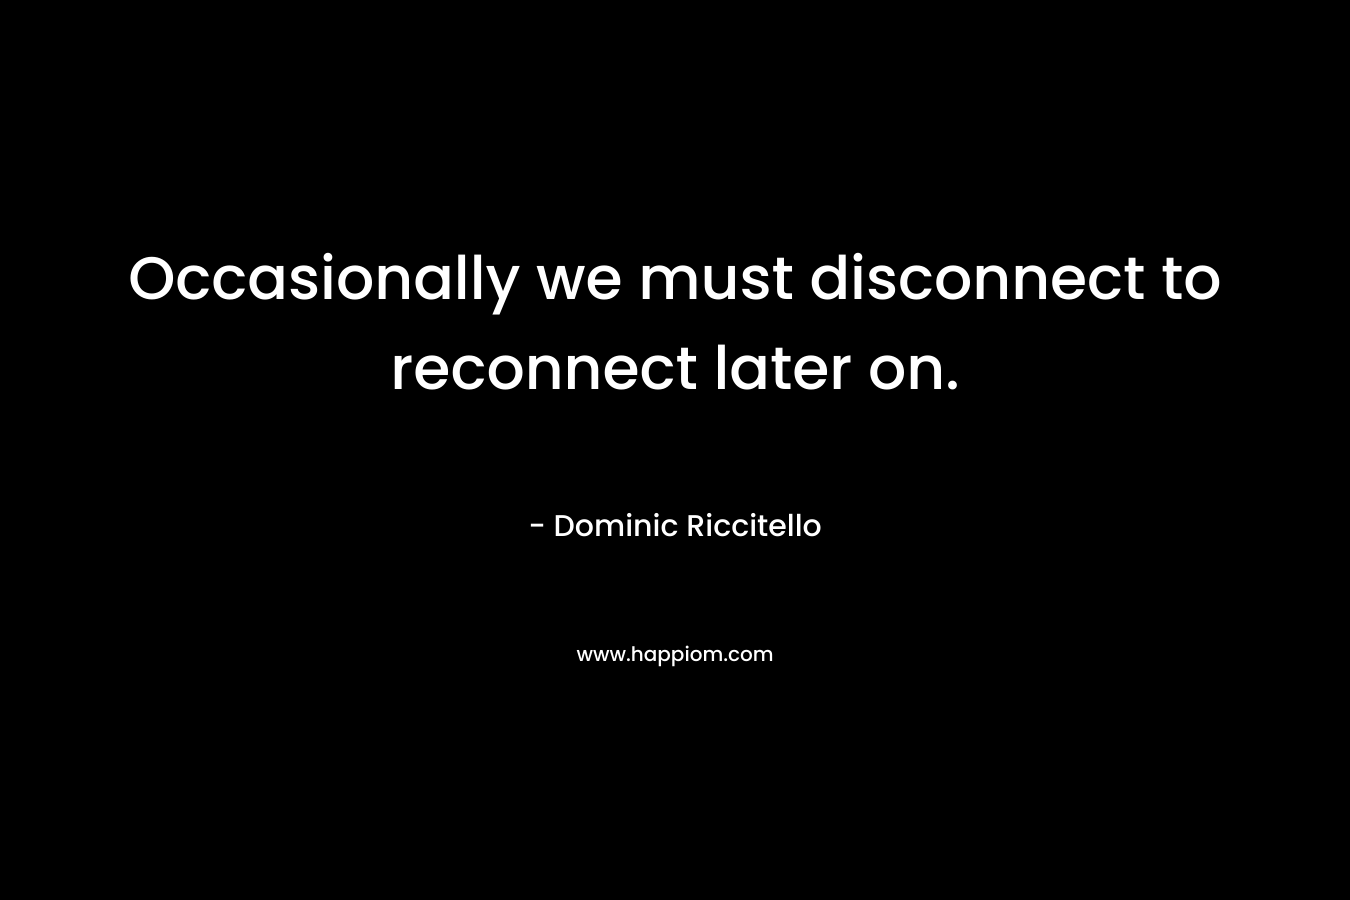 Occasionally we must disconnect to reconnect later on. – Dominic Riccitello